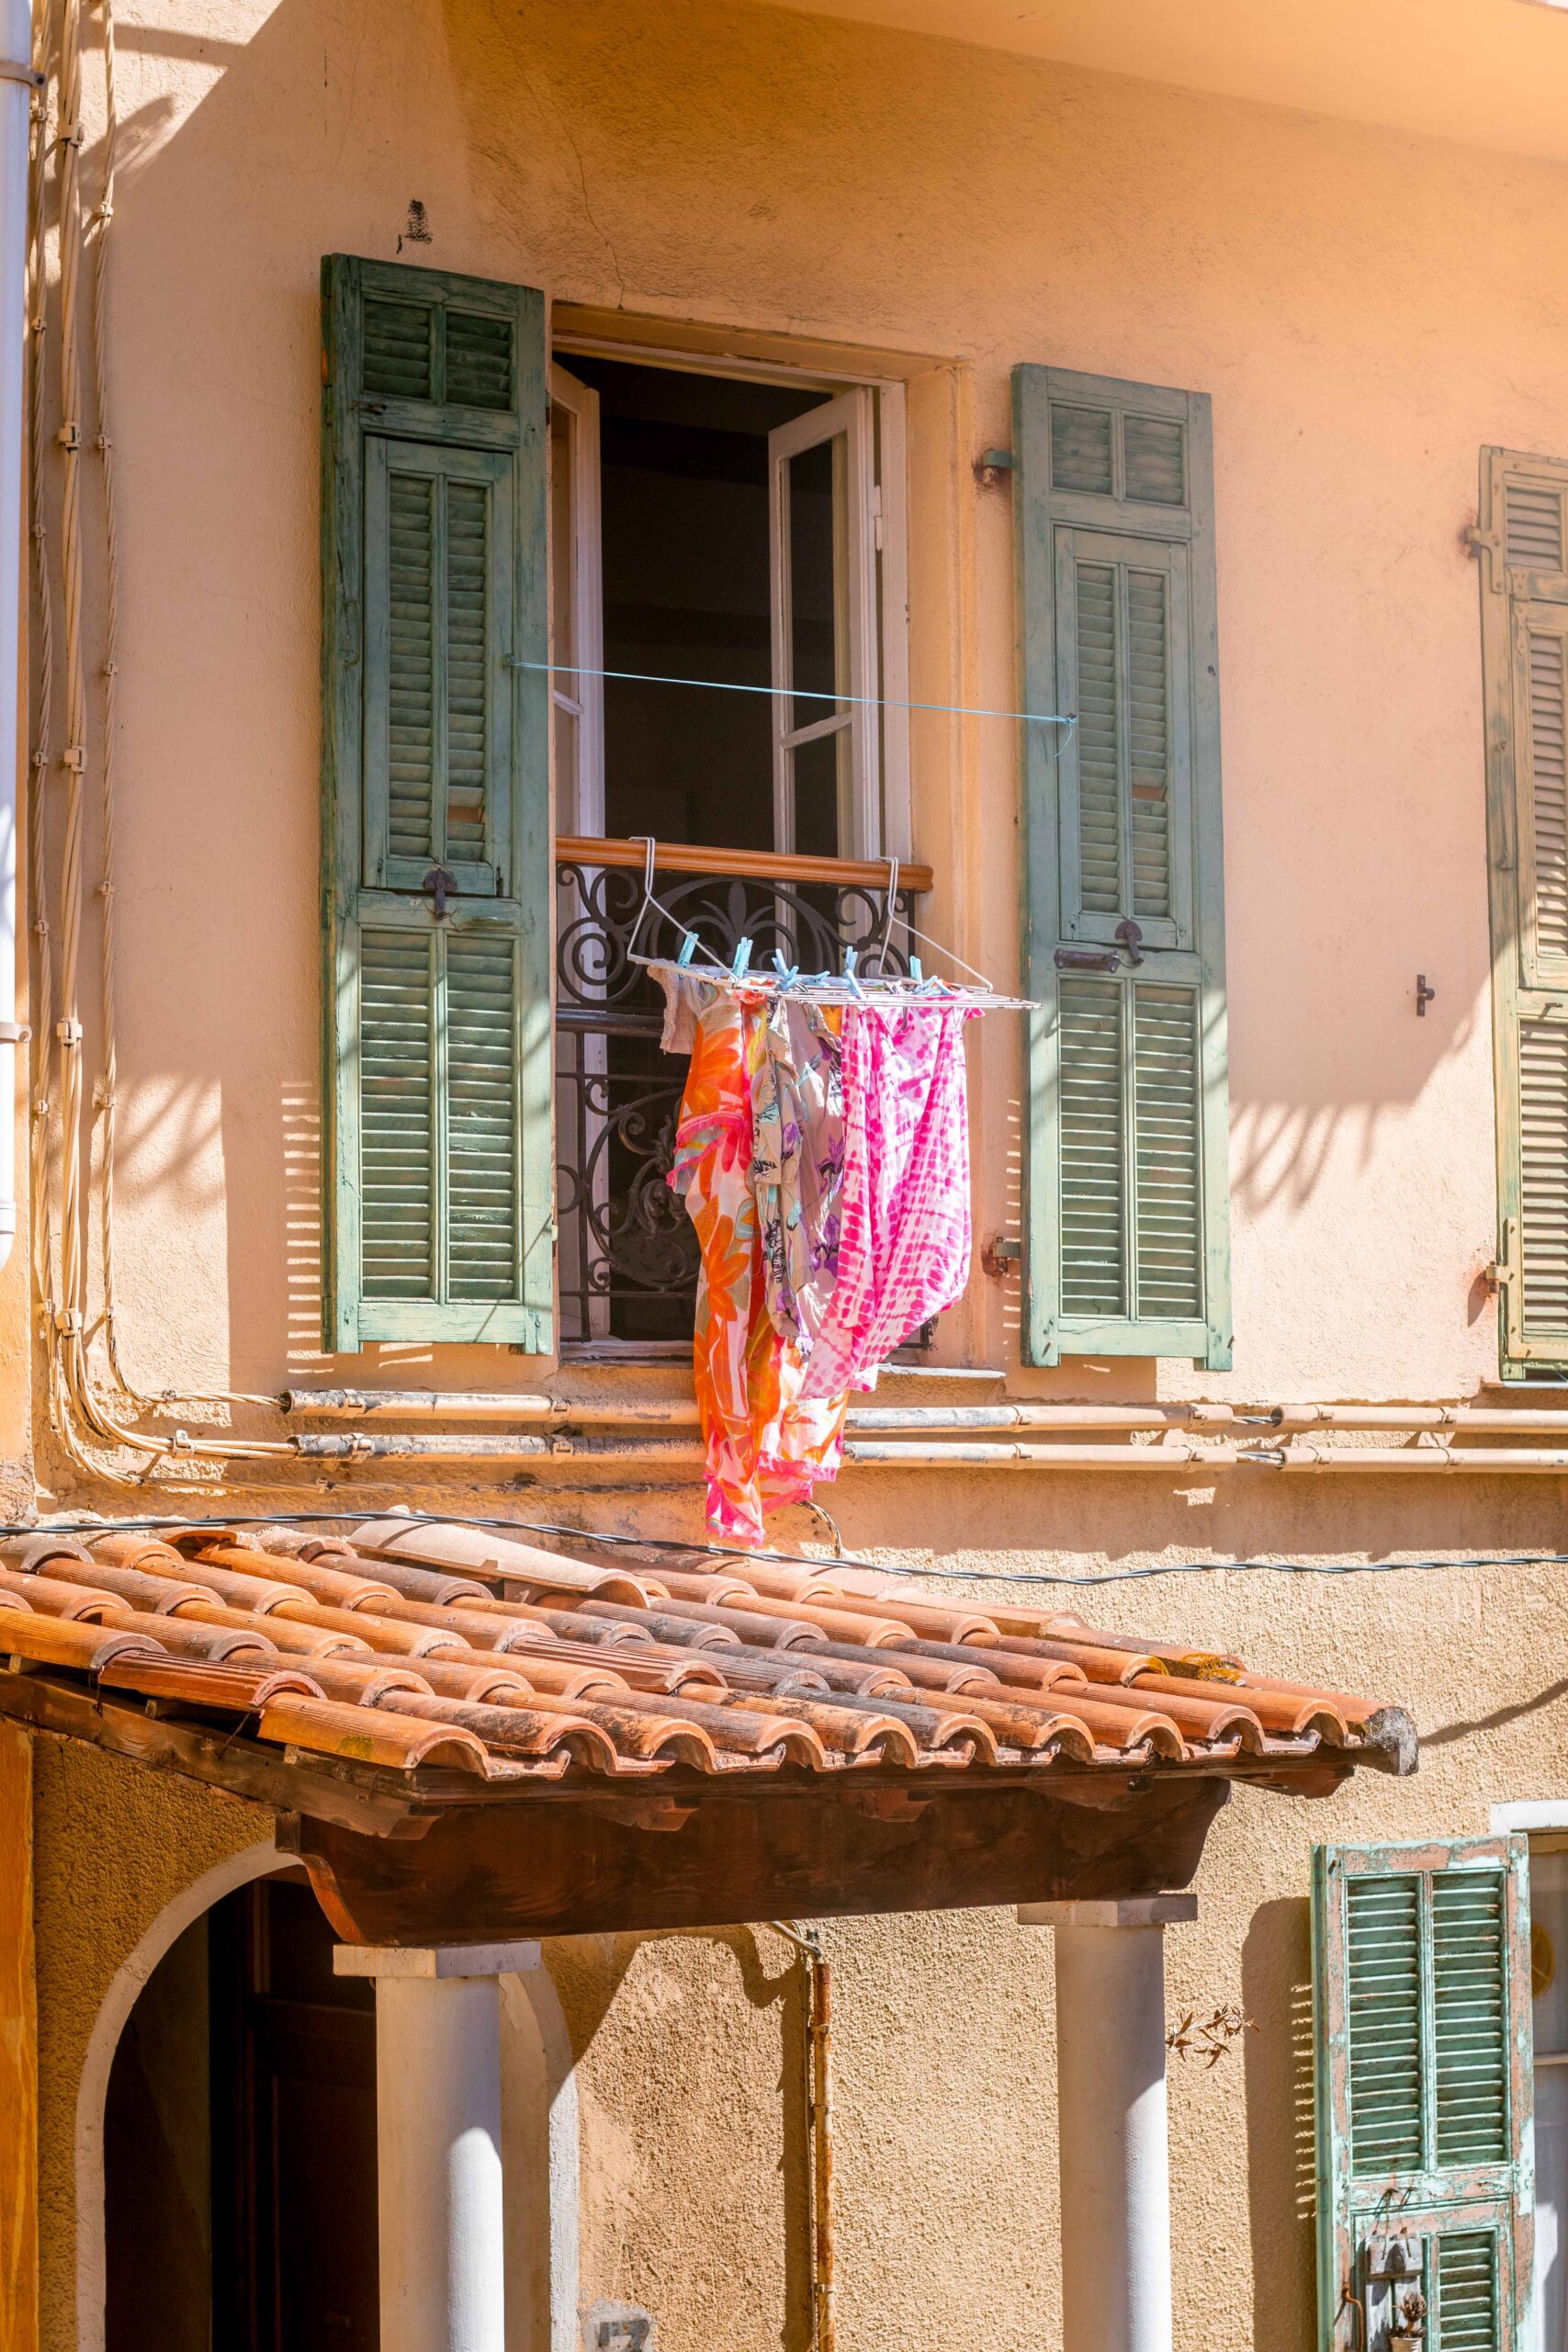 Hanging clothes drying on the balcony of colourful buildings facades on a sunny day in the Old Town of Villefranche-sur-Mer, France